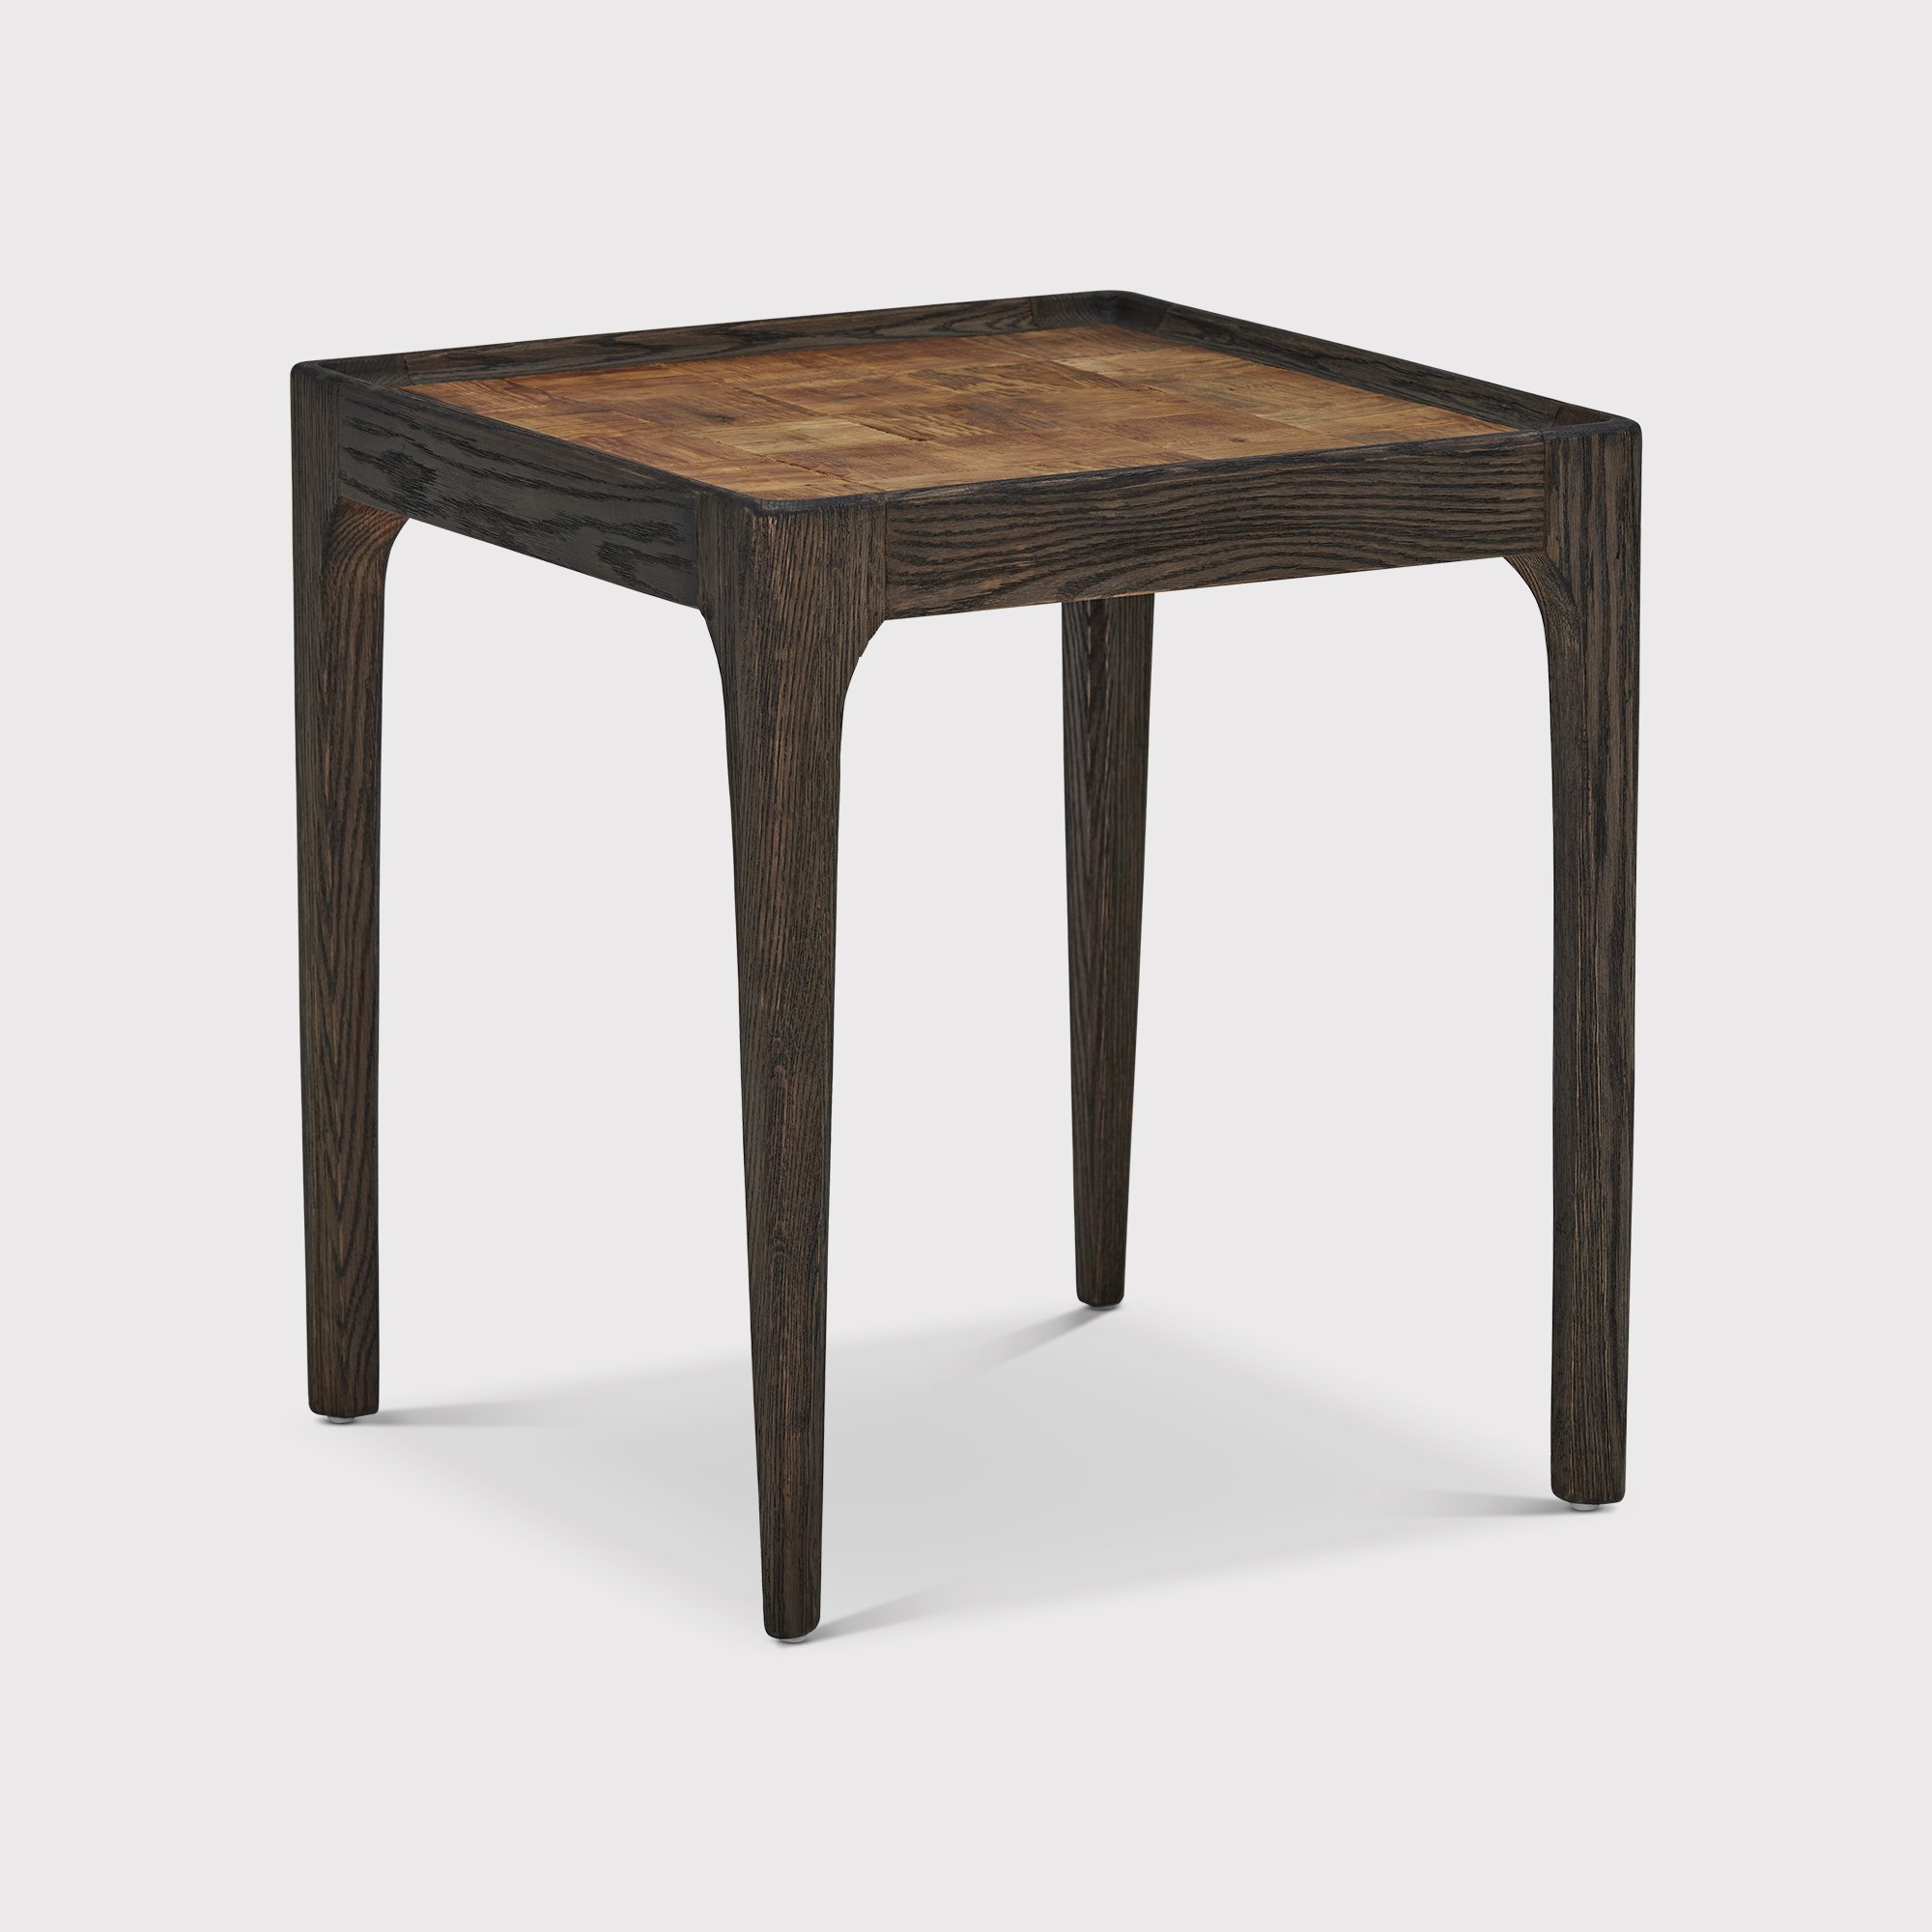 Jude Side Table With Inlay, Brown Oak | Barker & Stonehouse